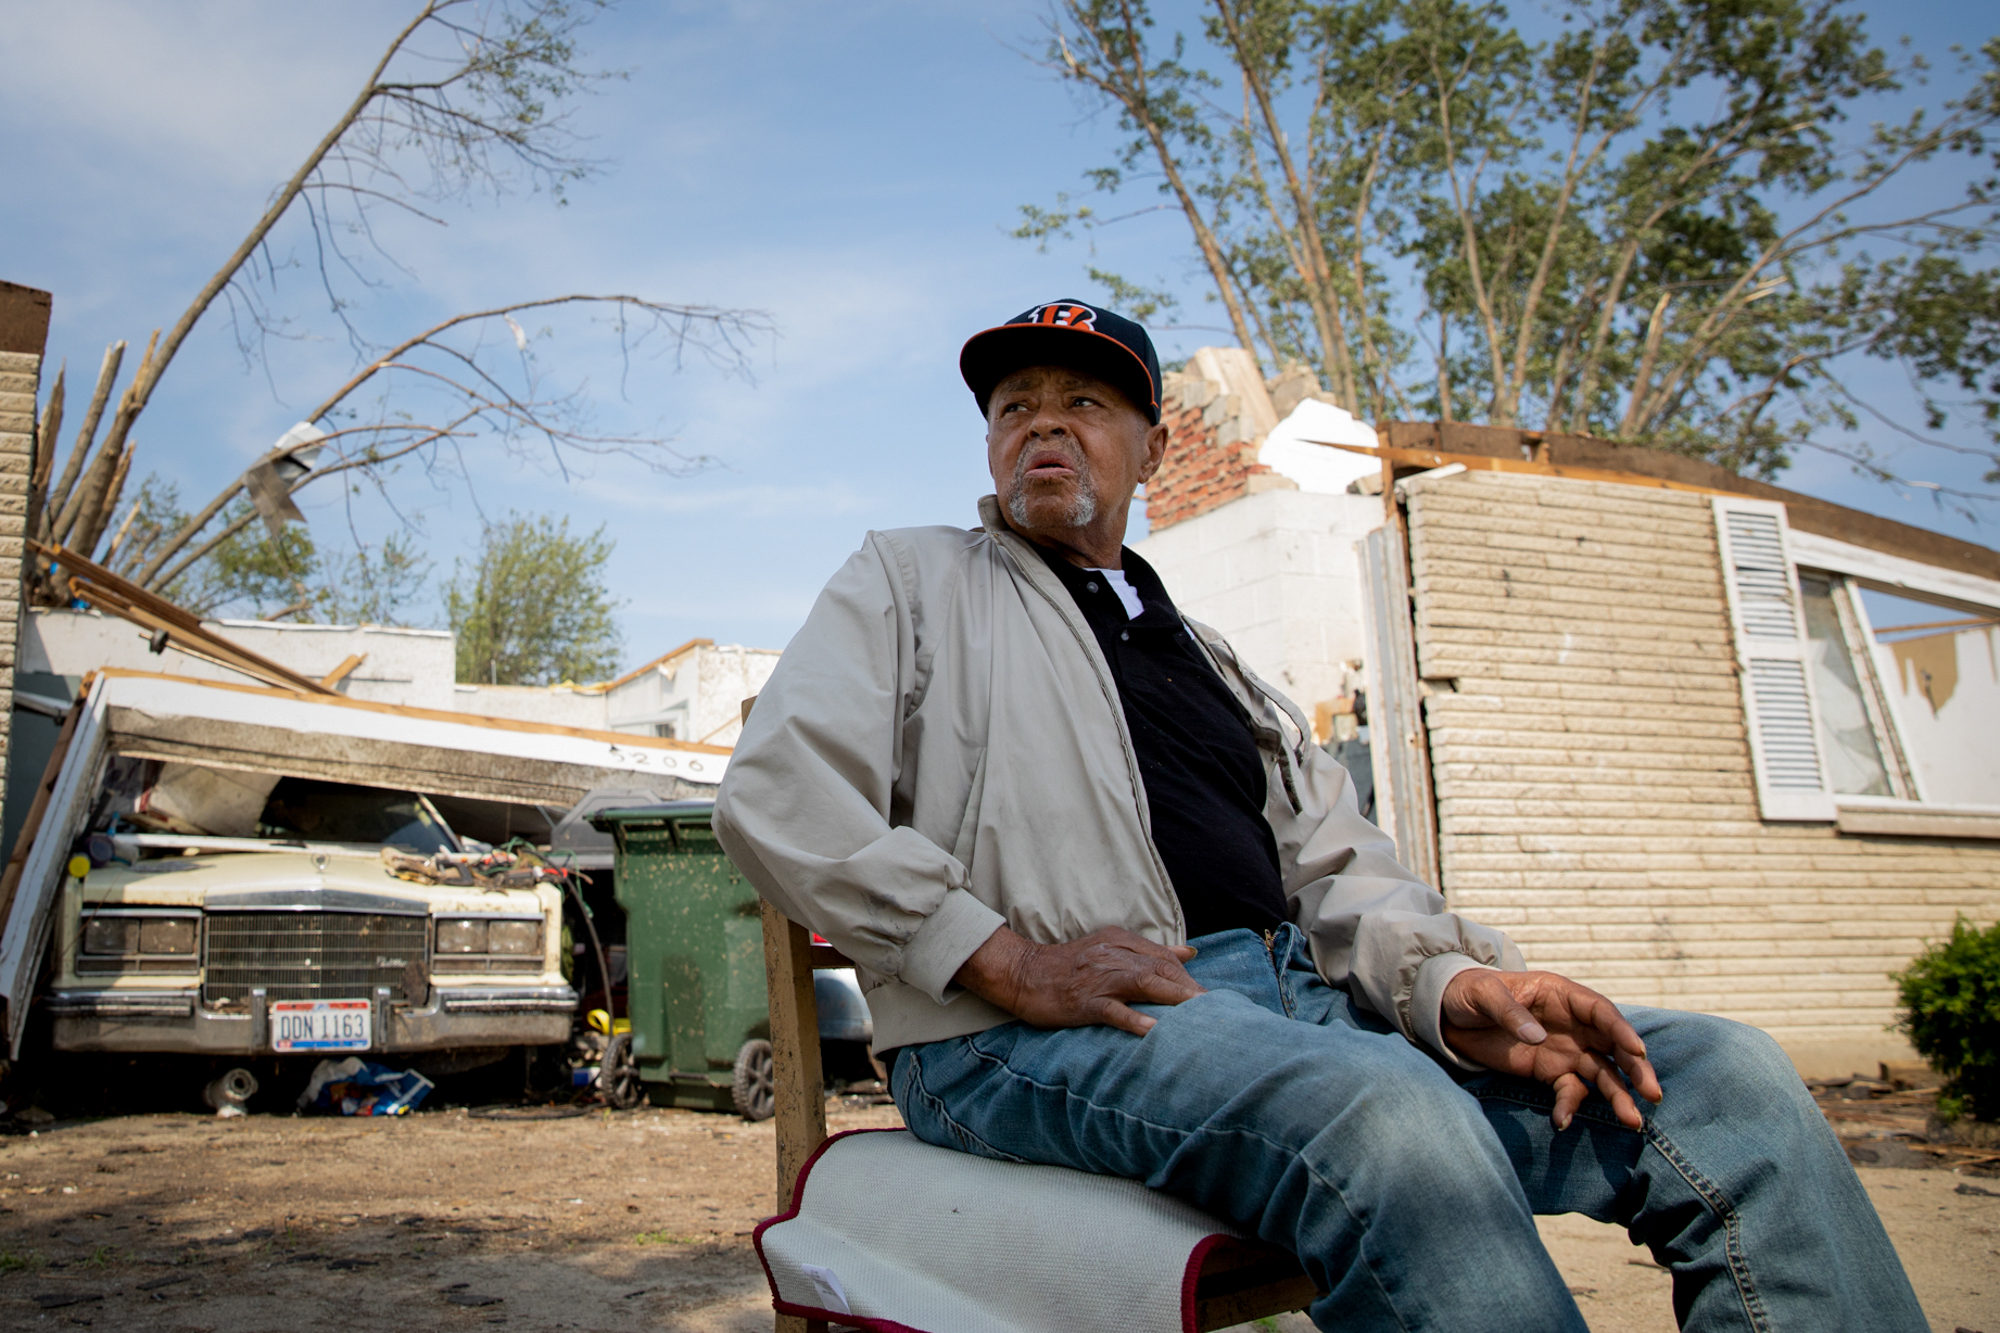 Charles “Smitty” Smith - After a series of tornadoes in Ohio in May 2019, Charles “Smitty” Smith, 76, was trapped under his wooden bedframe. All he could see was a tree and bits of sky. His roof was gone, but his 50 or so suits remained in the closet, and pictures of his mother and father still hung on the wall. Even though Smith's home in Trotwood is unlivable, he has to make payments on it until 2025. He thought his insurance would pay it off but discovered “it doesn’t work like that.” (Stacy Fernández/News21)